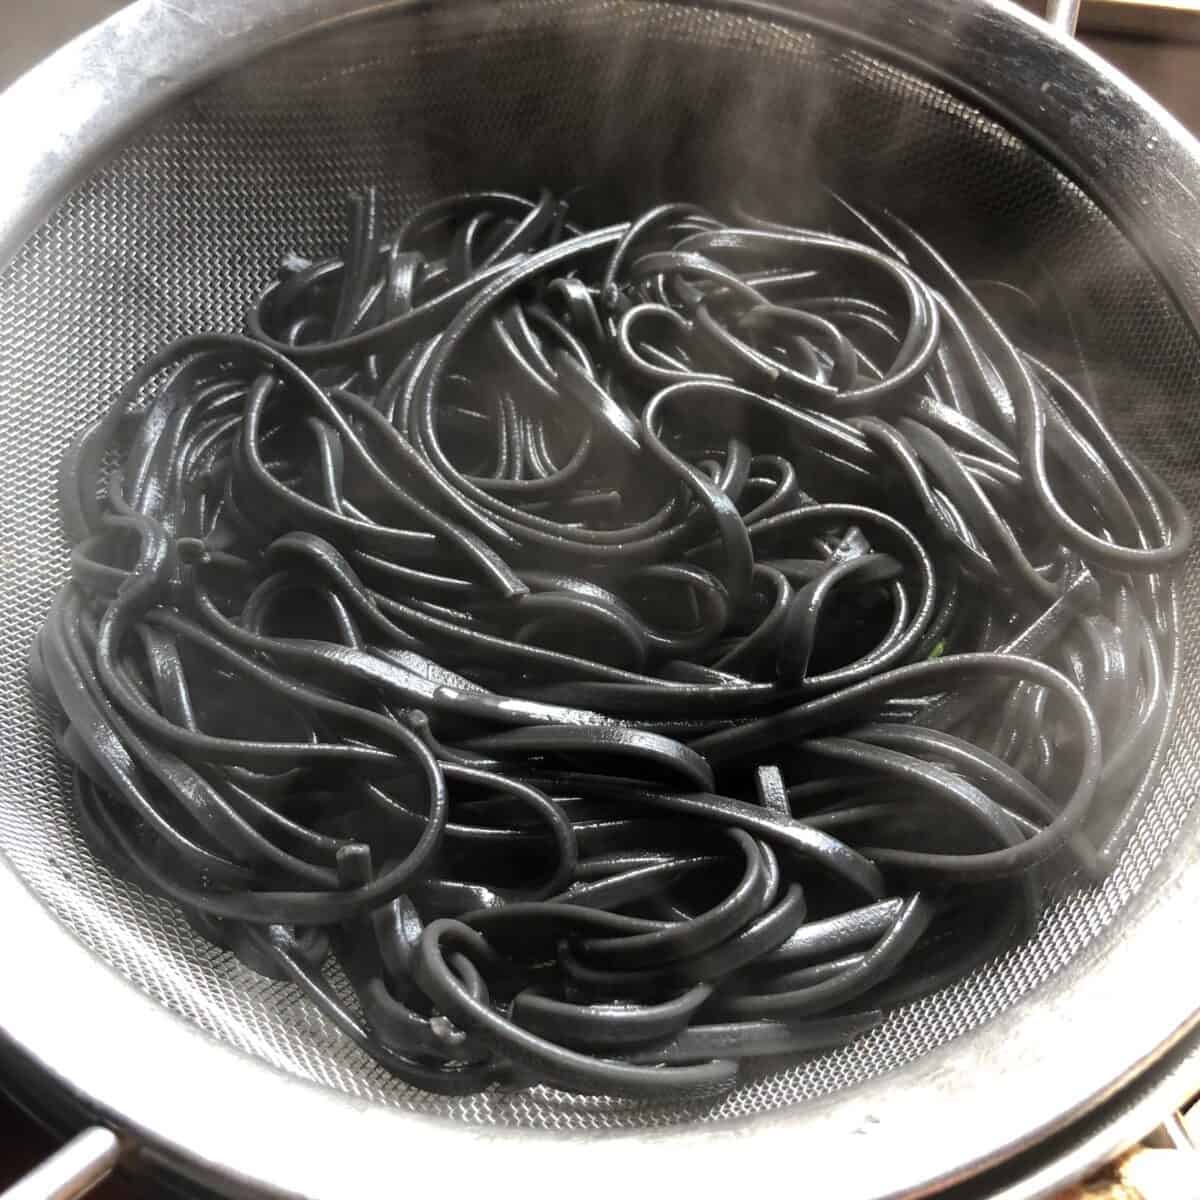 black linguine pasta just cooked and steaming in a sieve.